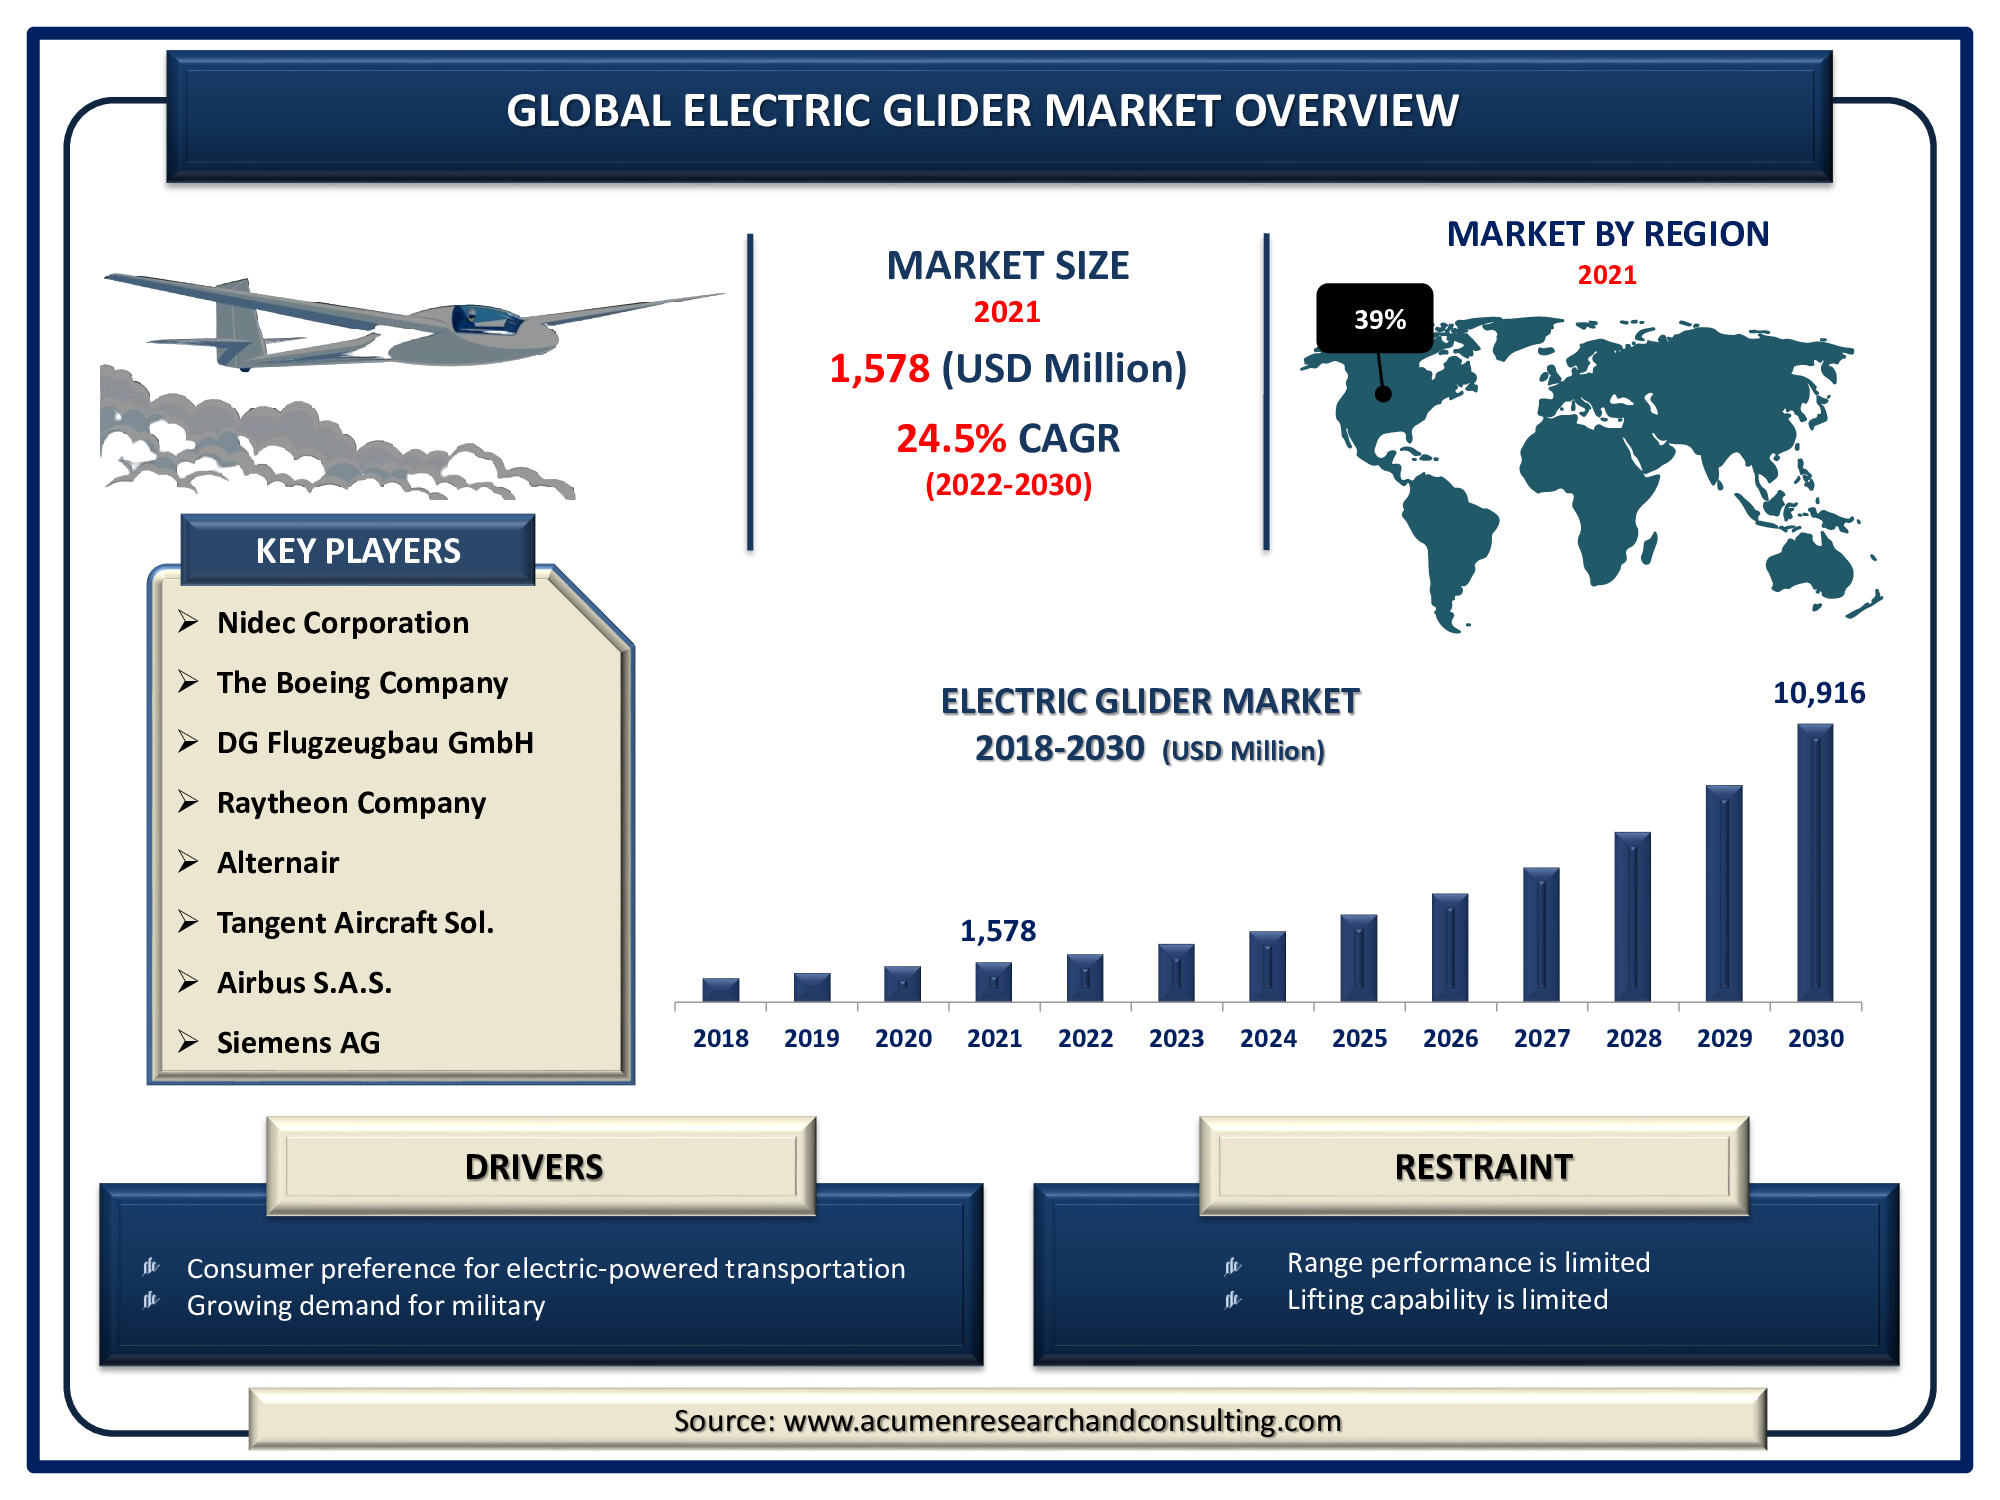 Electric Glider Market is expected to reach USD 10,916 Million by 2030 at a CAGR of 24.5%